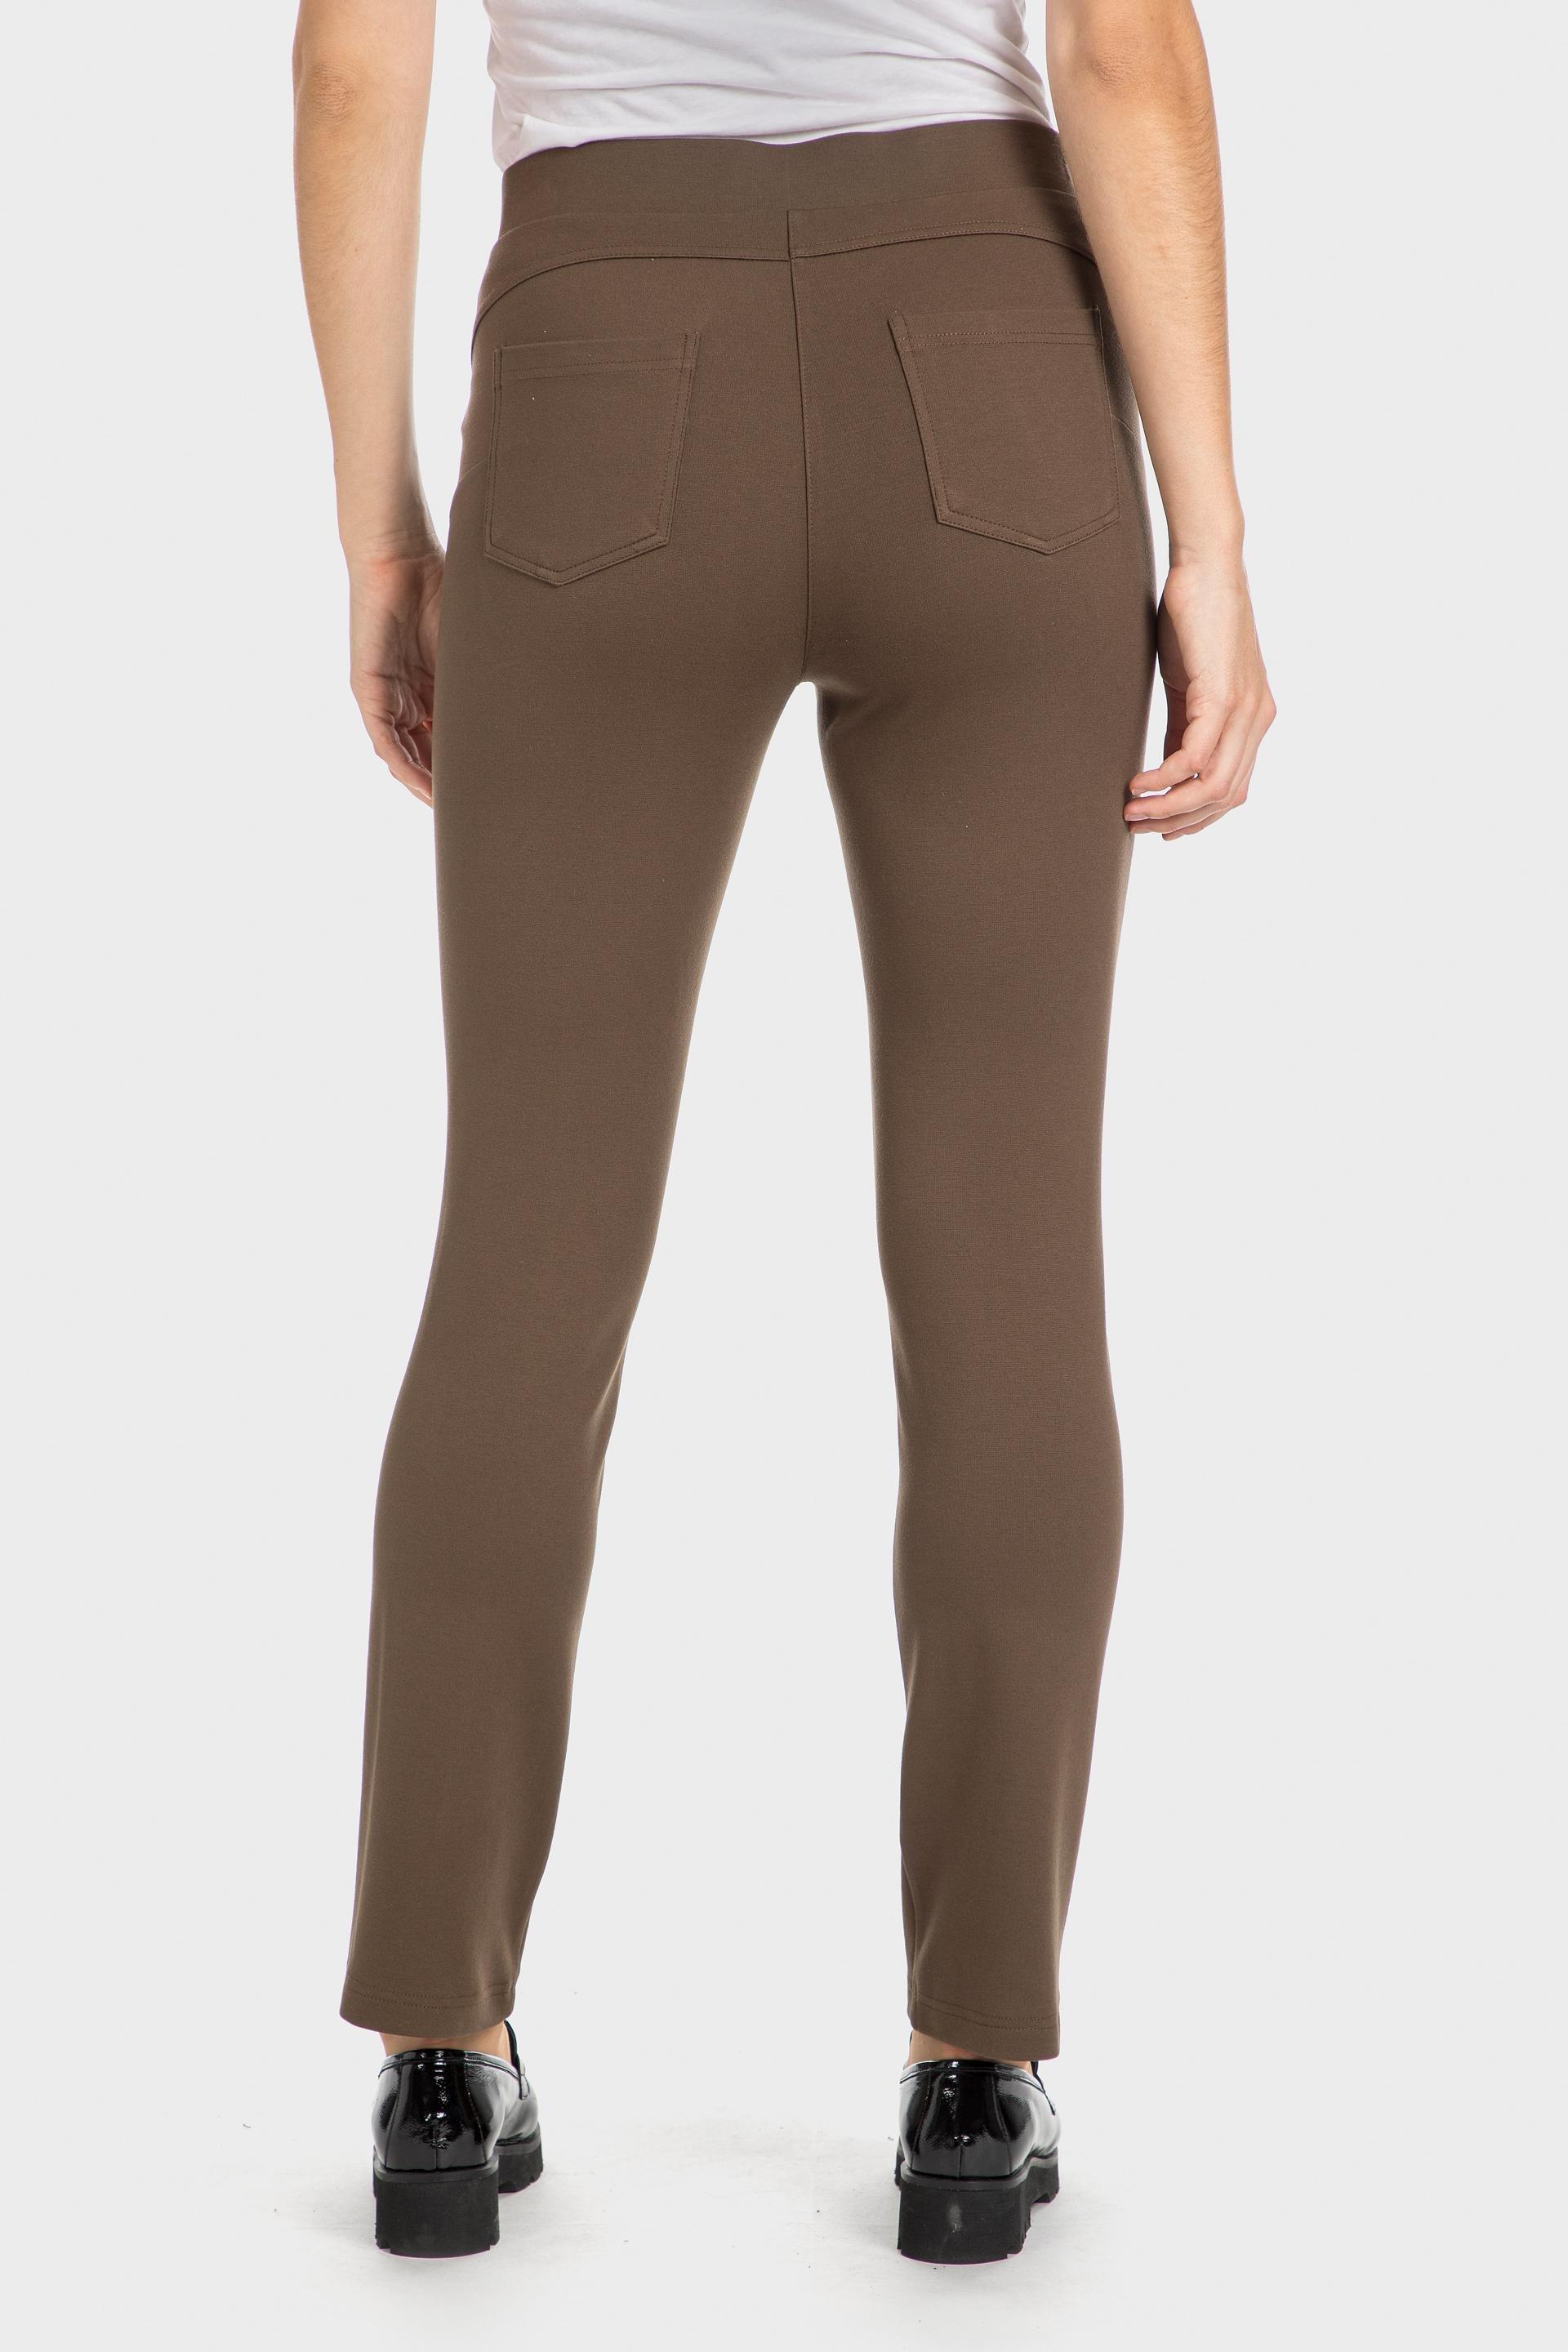 Punt Roma - Brown Push Up Trousers